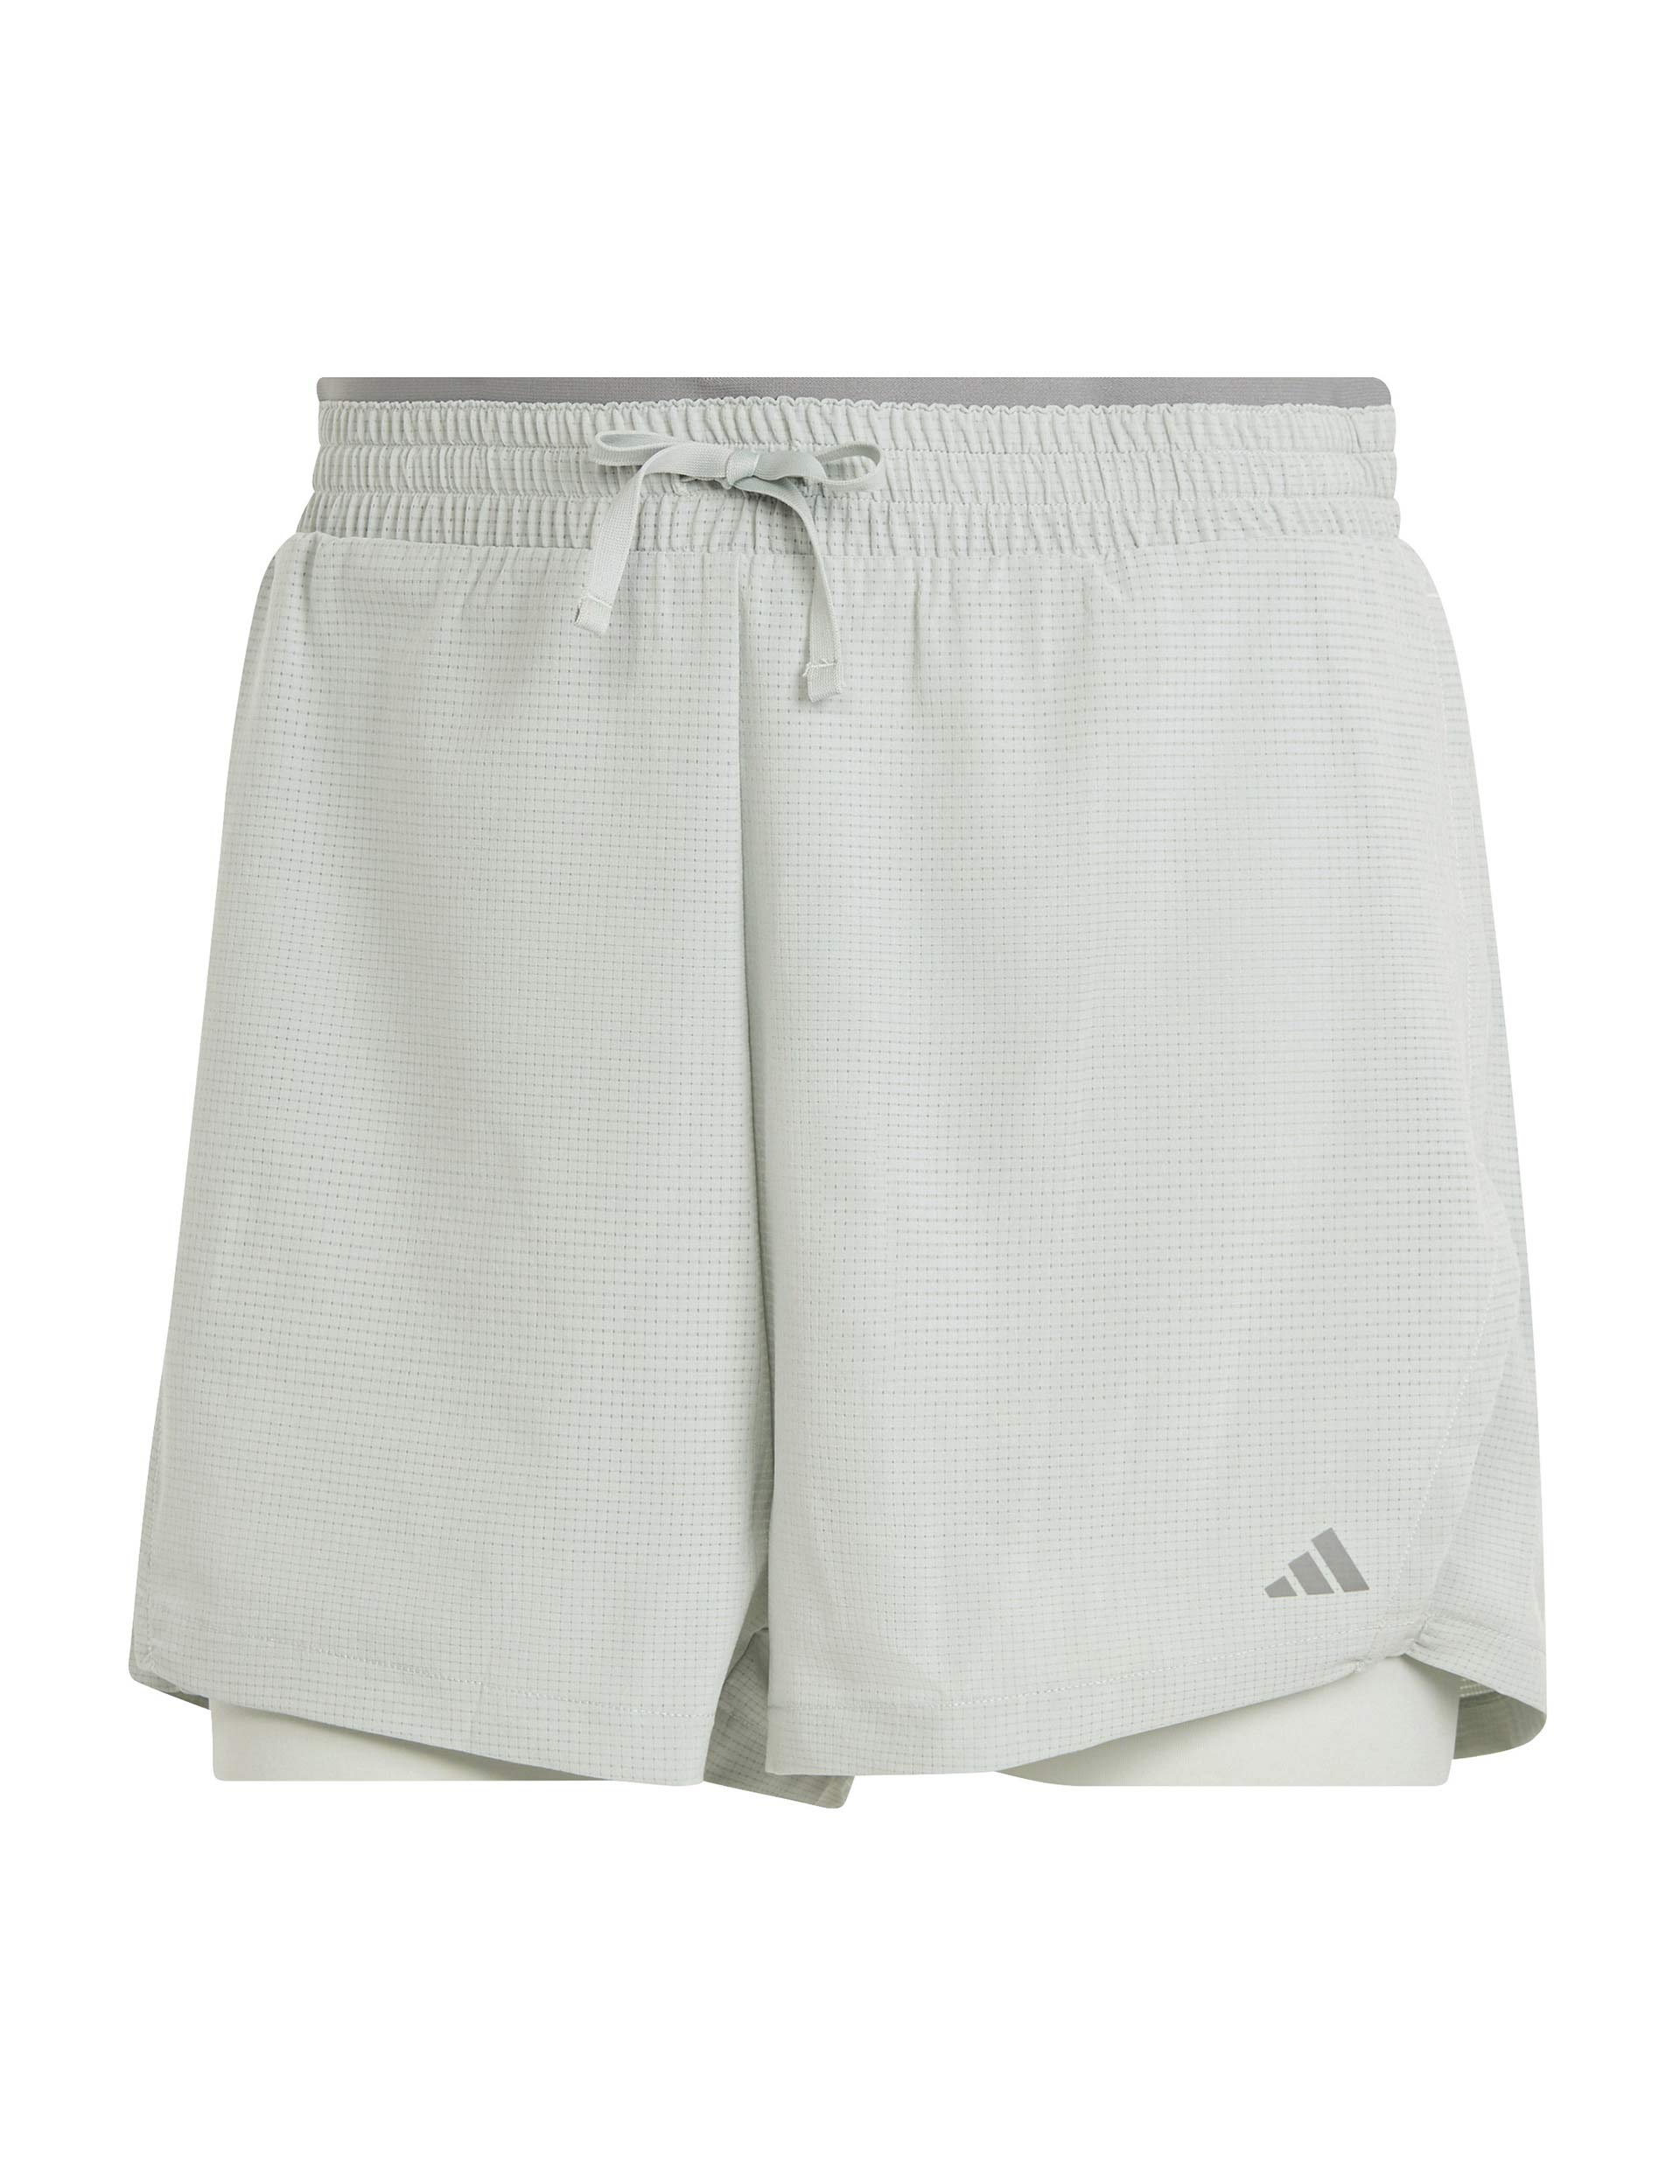 adidas HIIT HEAT.RDY Two-in-One Shorts - Green